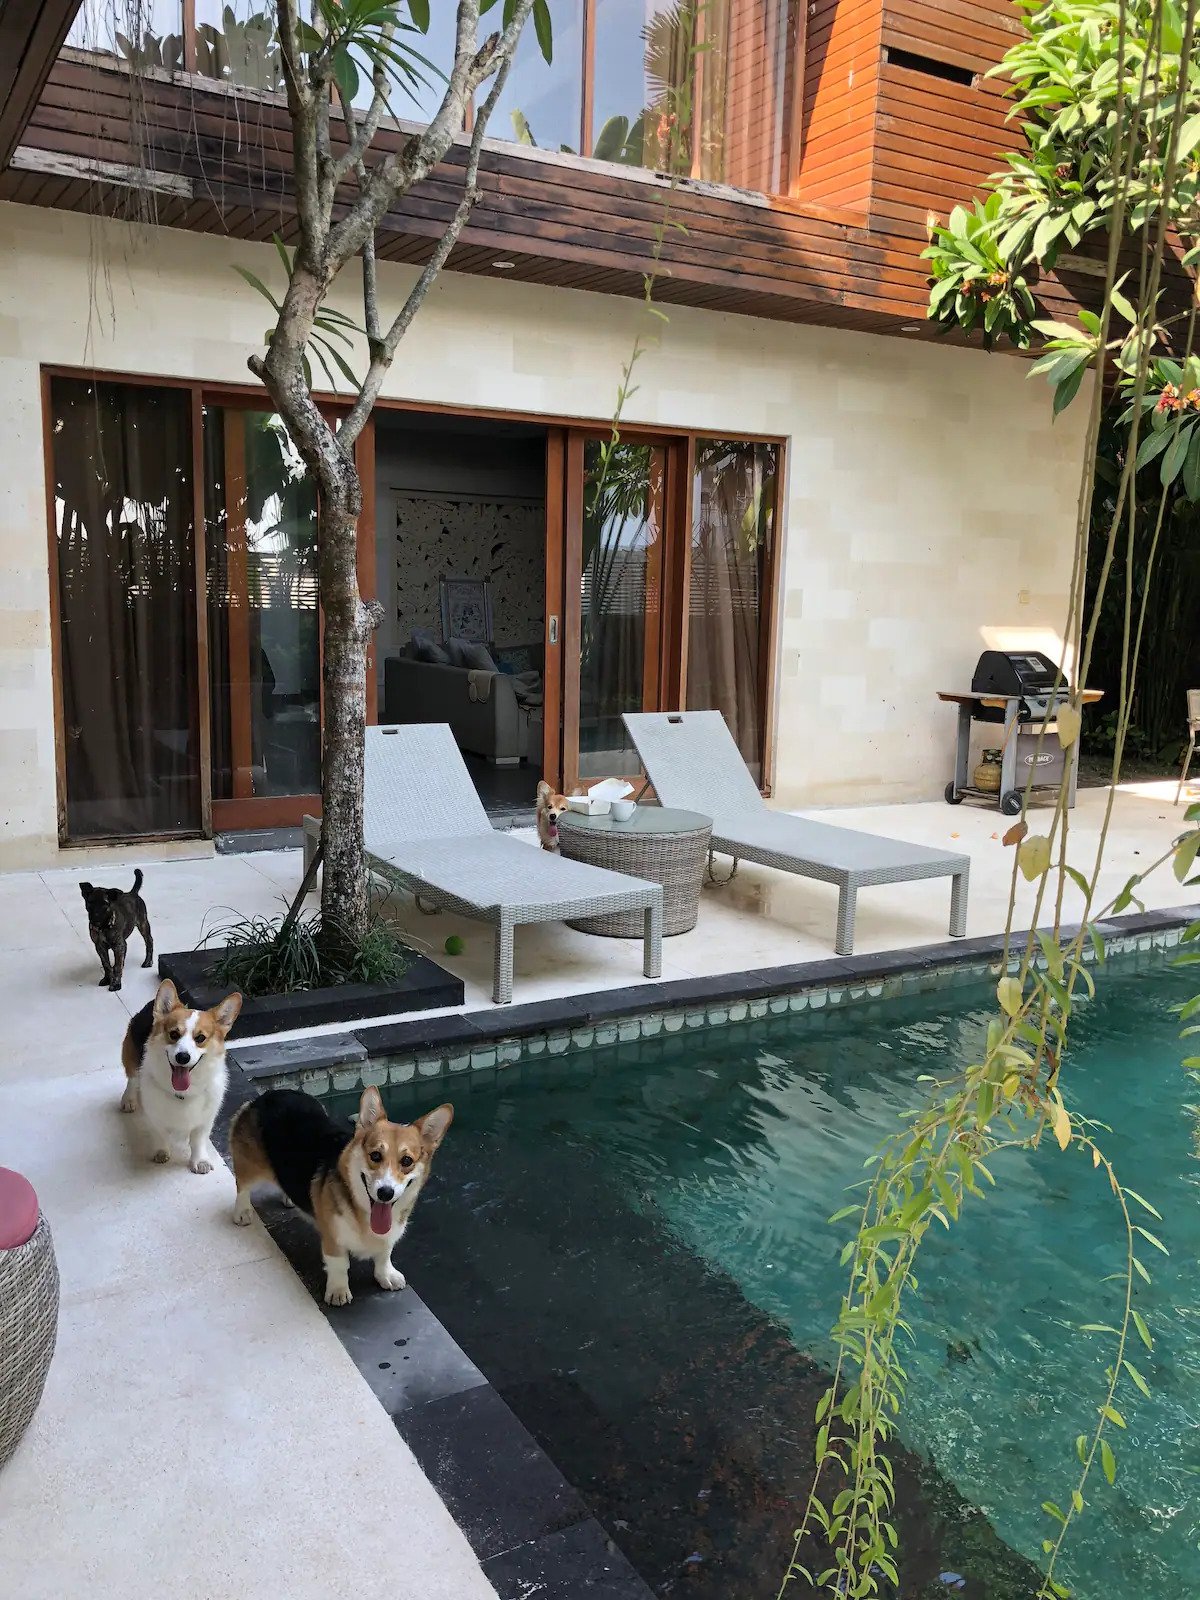 (Sumber foto: Airbnb/One Woof by The Beach)